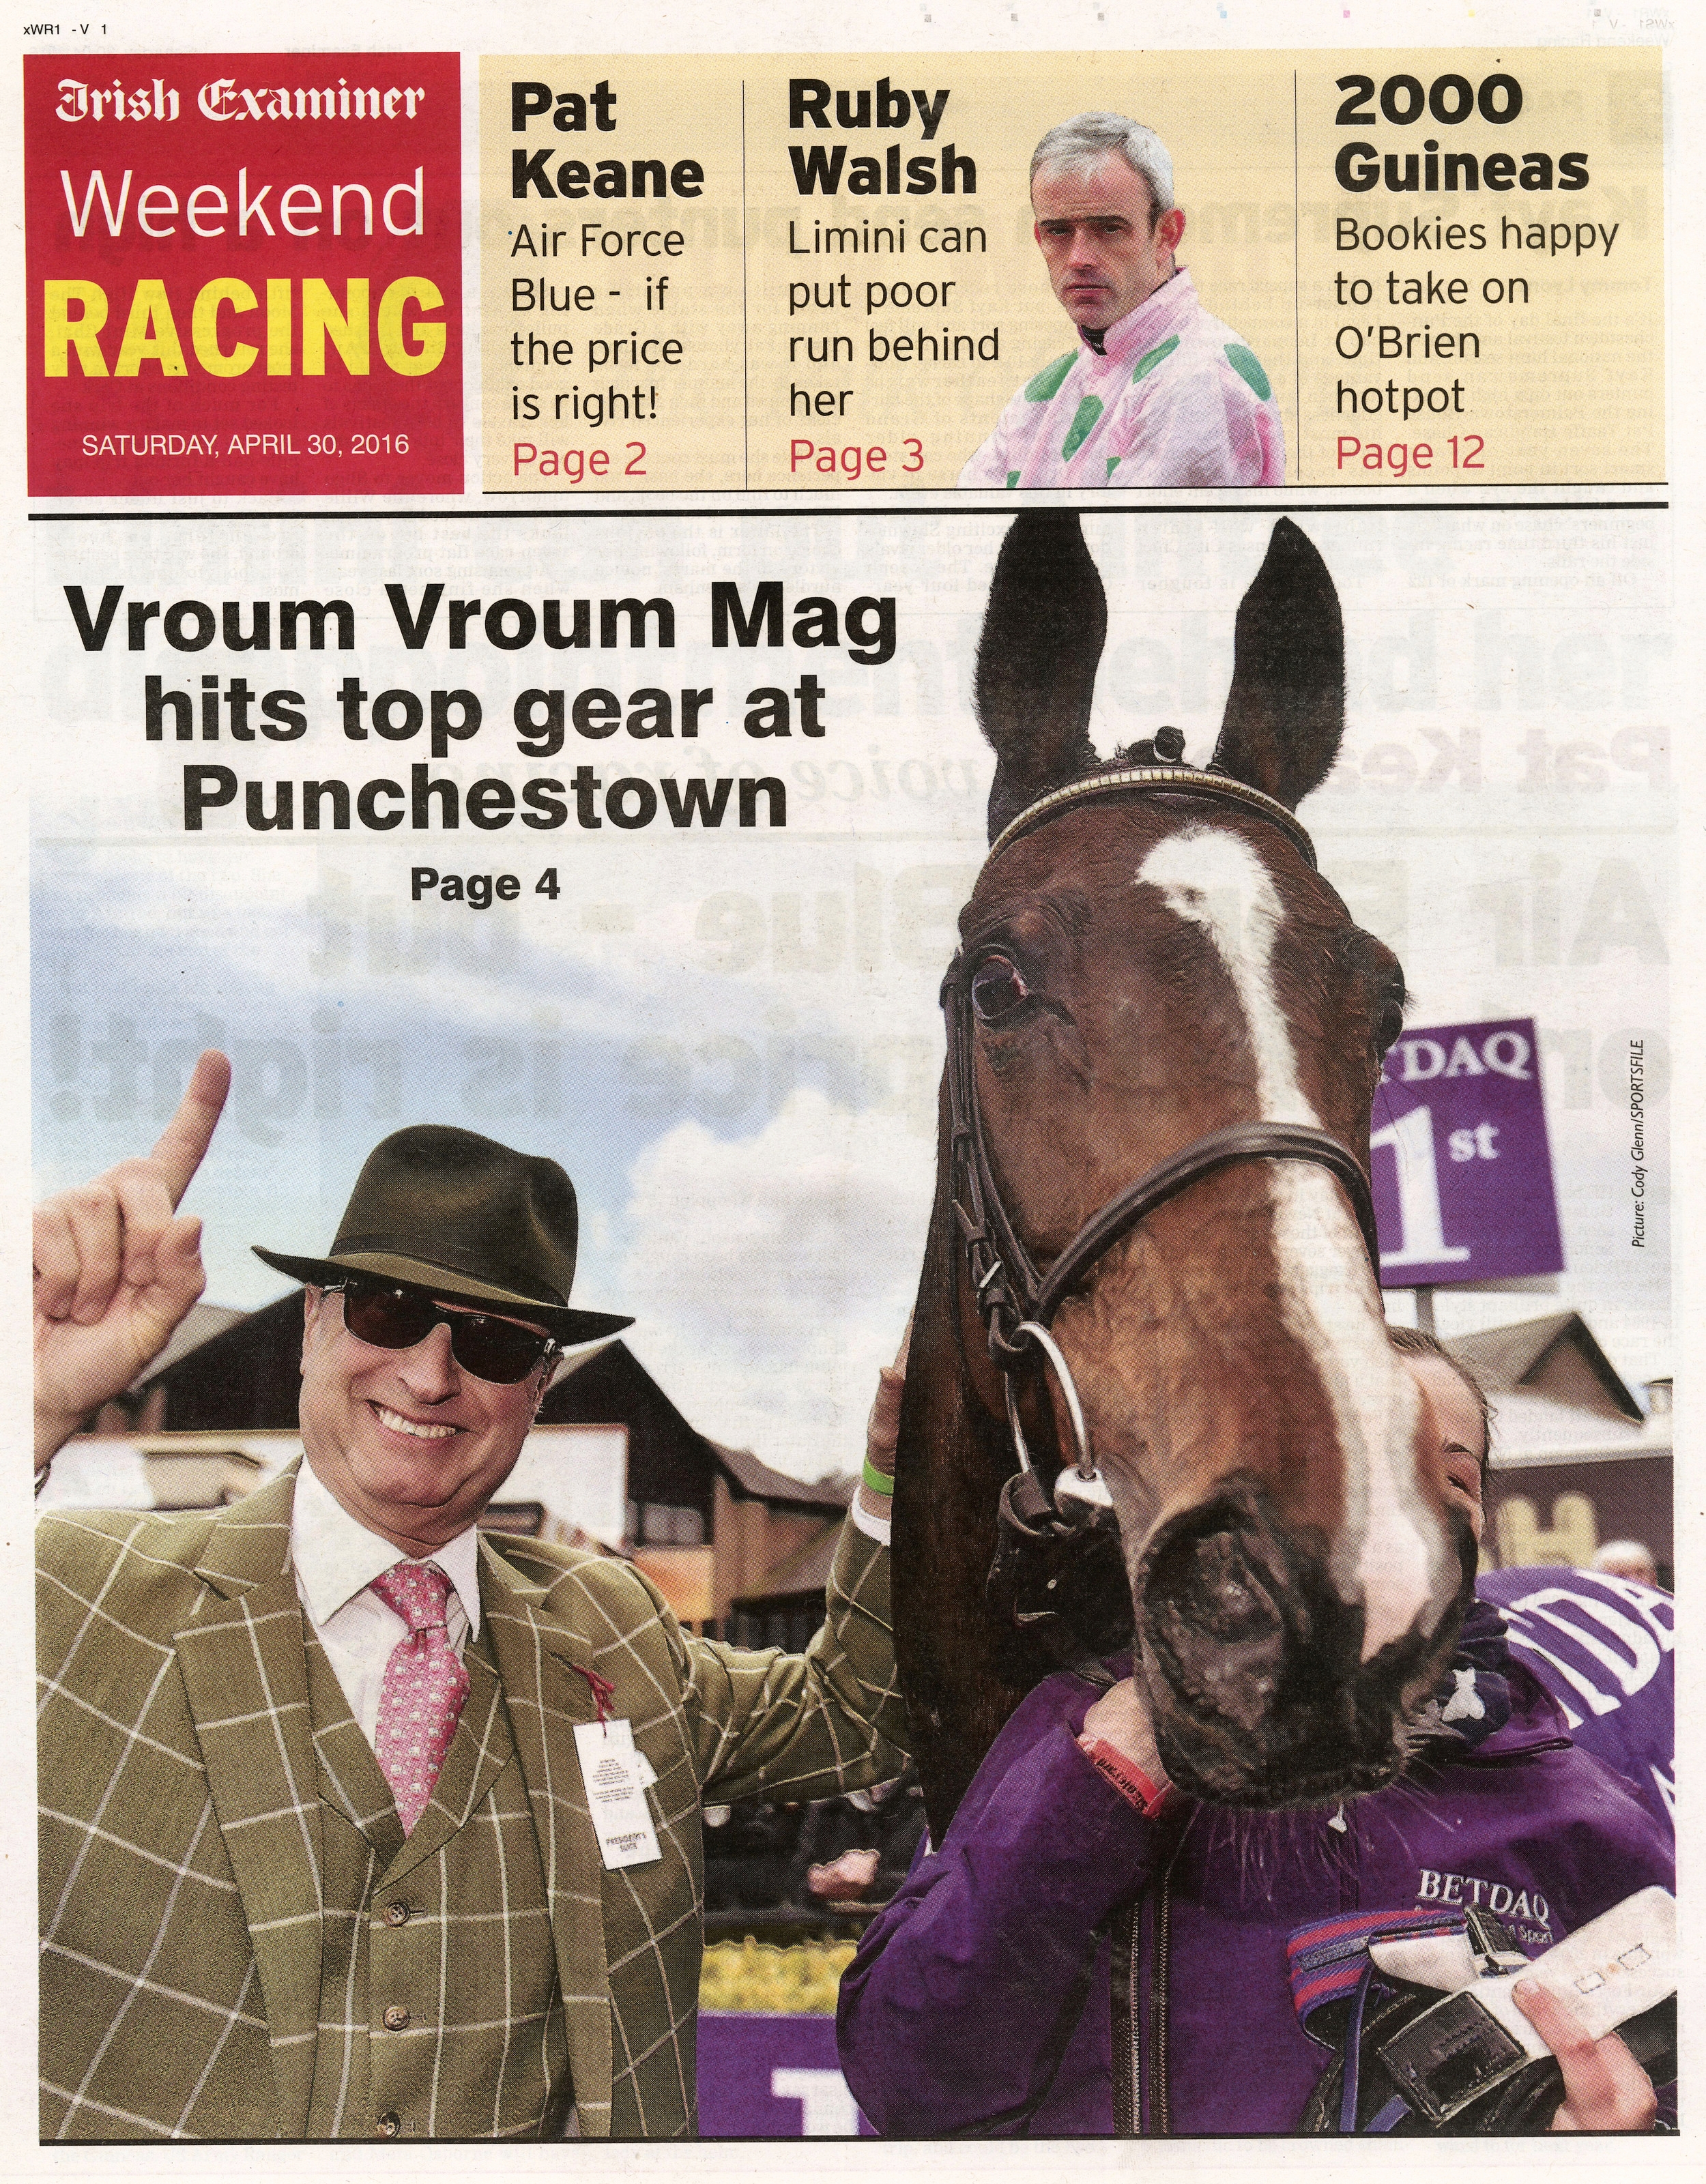  Owner Rich Ricci with Vroum Vroum Mag after winning at Punchestown Festival April 30 2016  Irish Examiner  